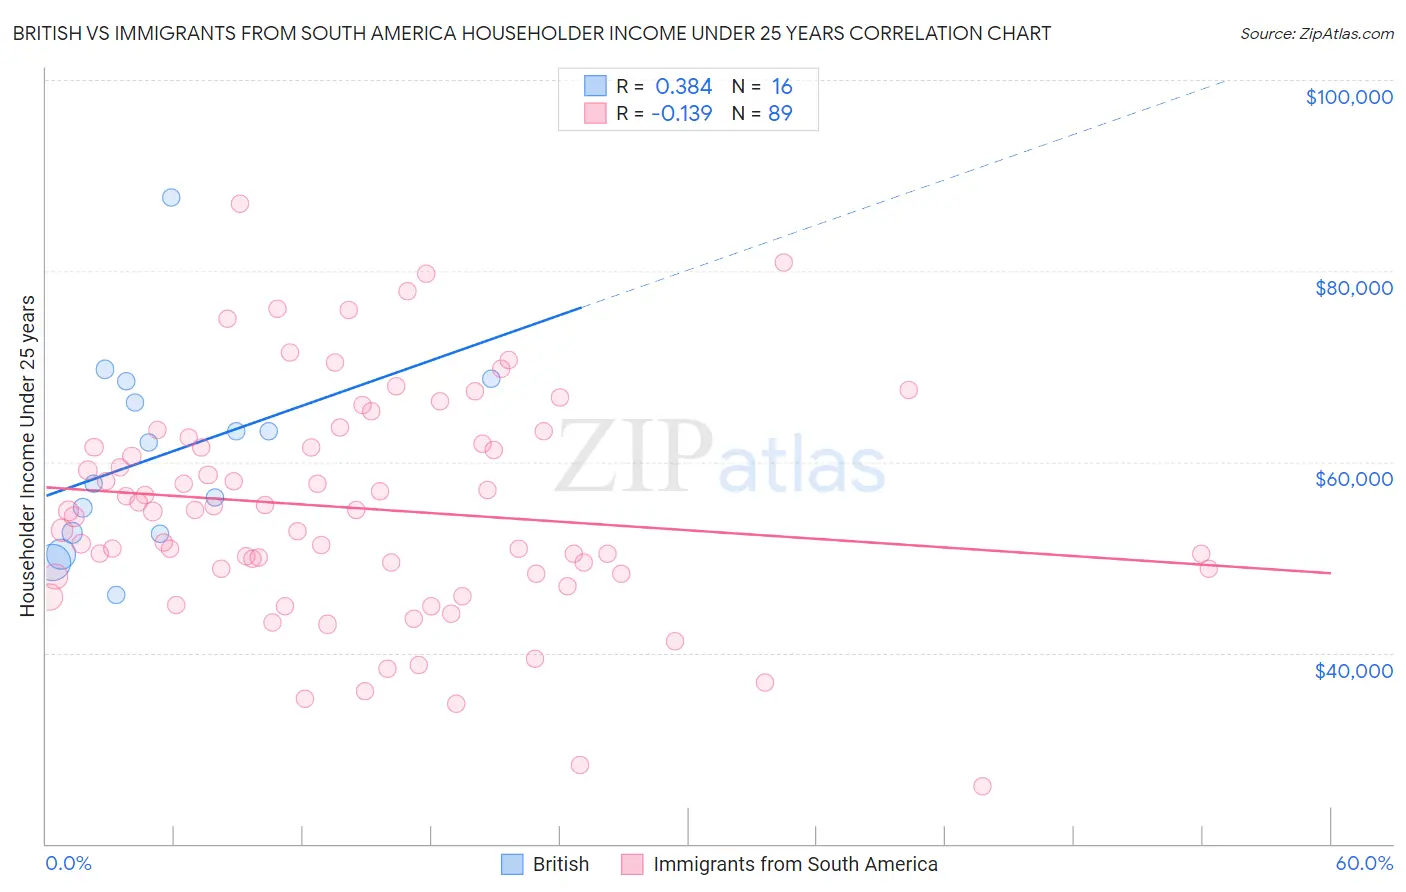 British vs Immigrants from South America Householder Income Under 25 years